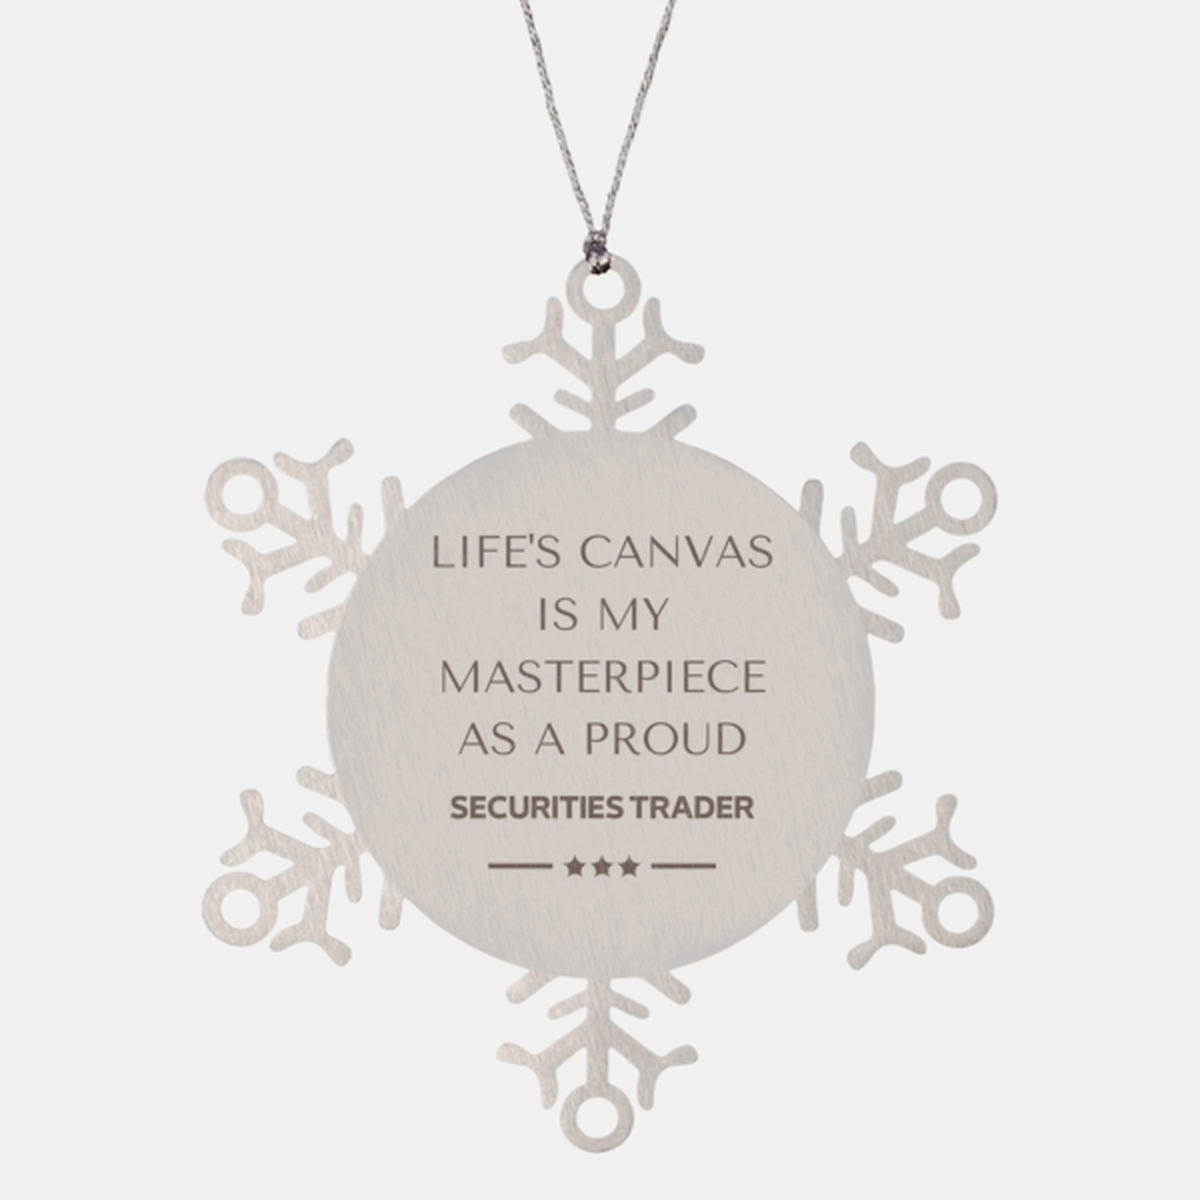 Proud Securities Trader Gifts, Life's canvas is my masterpiece, Epic Birthday Christmas Unique Snowflake Ornament For Securities Trader, Coworkers, Men, Women, Friends